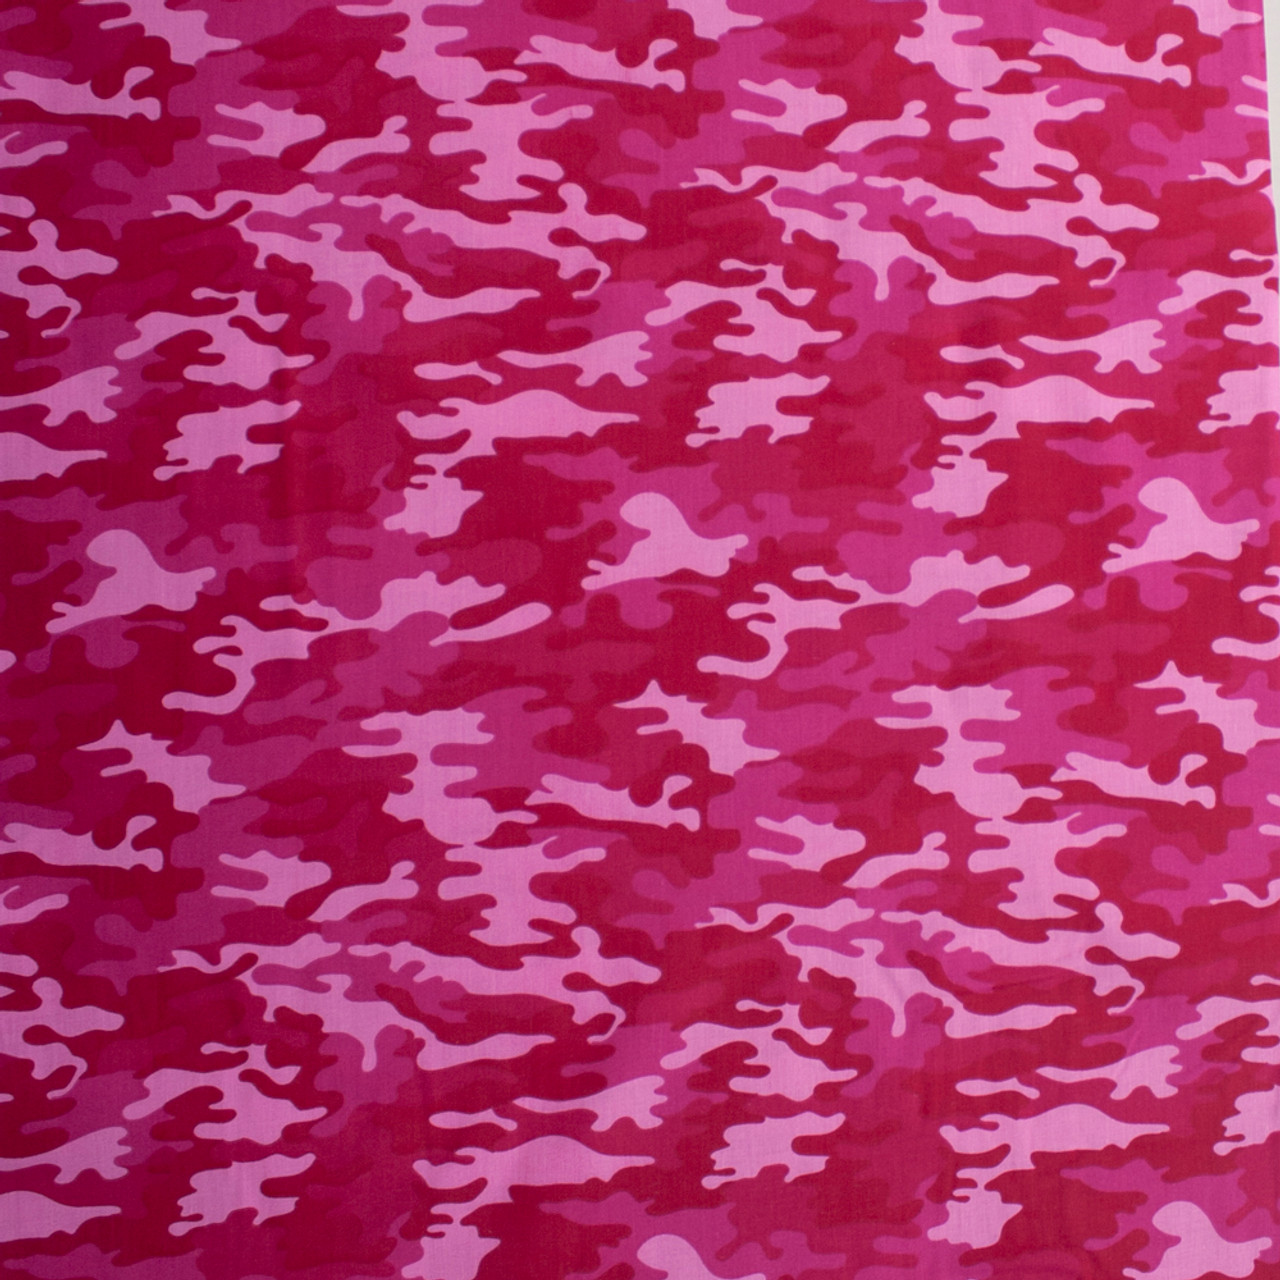 Hot Pink Lining Fabric, Fabric By the Yard